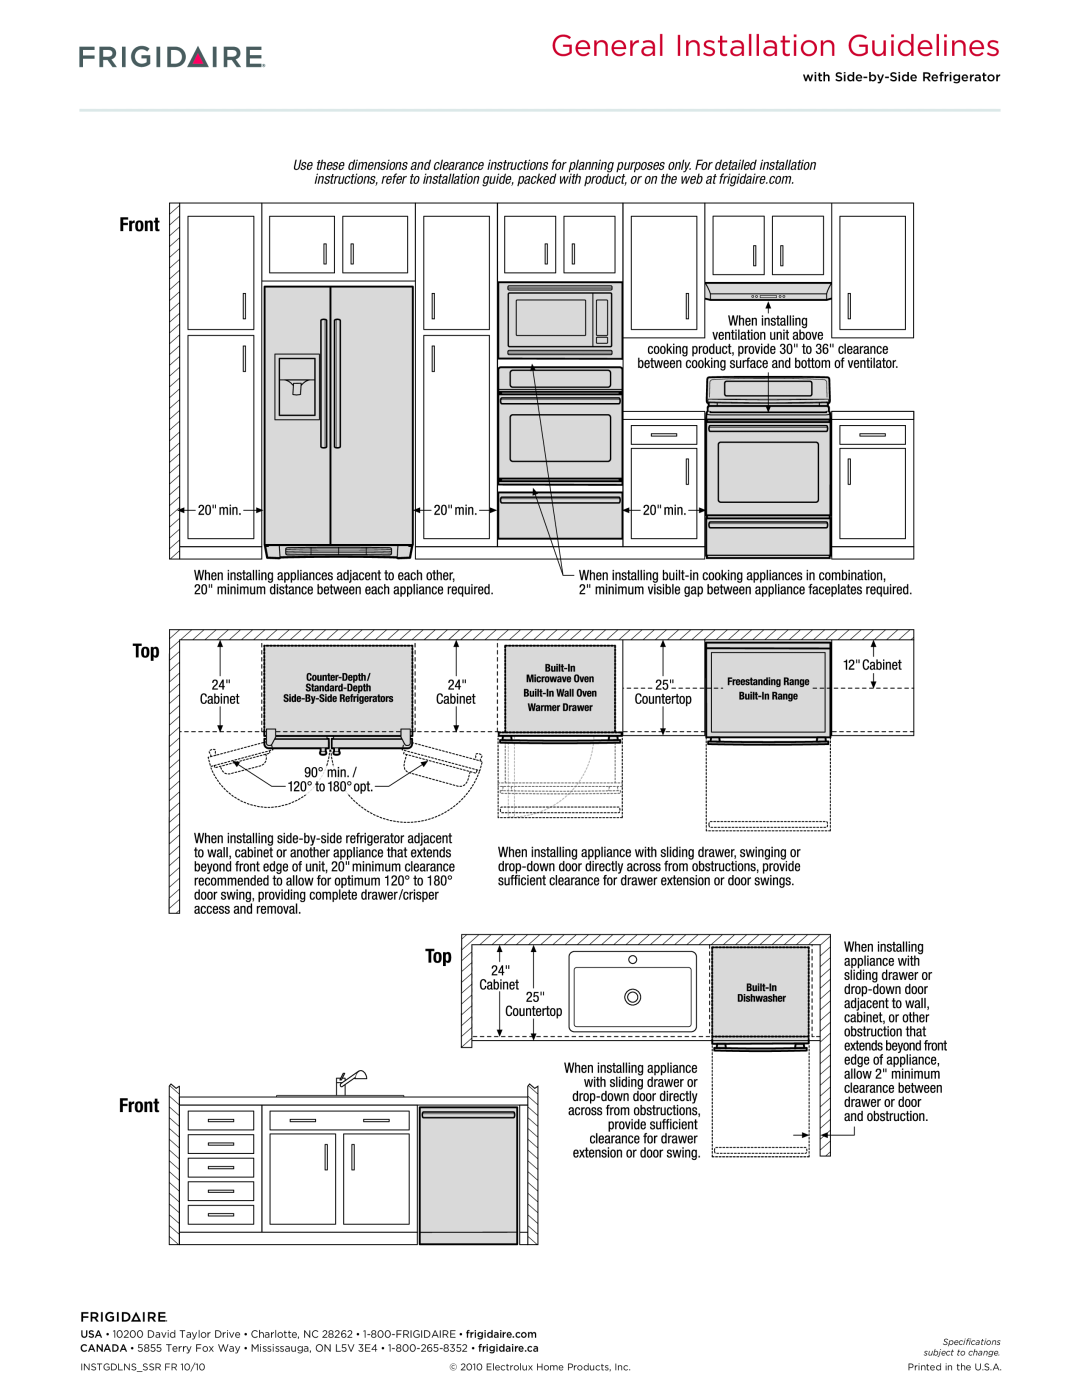 Frigidaire FPIF3093L F dimensions General Installation Guidelines, Top Front 